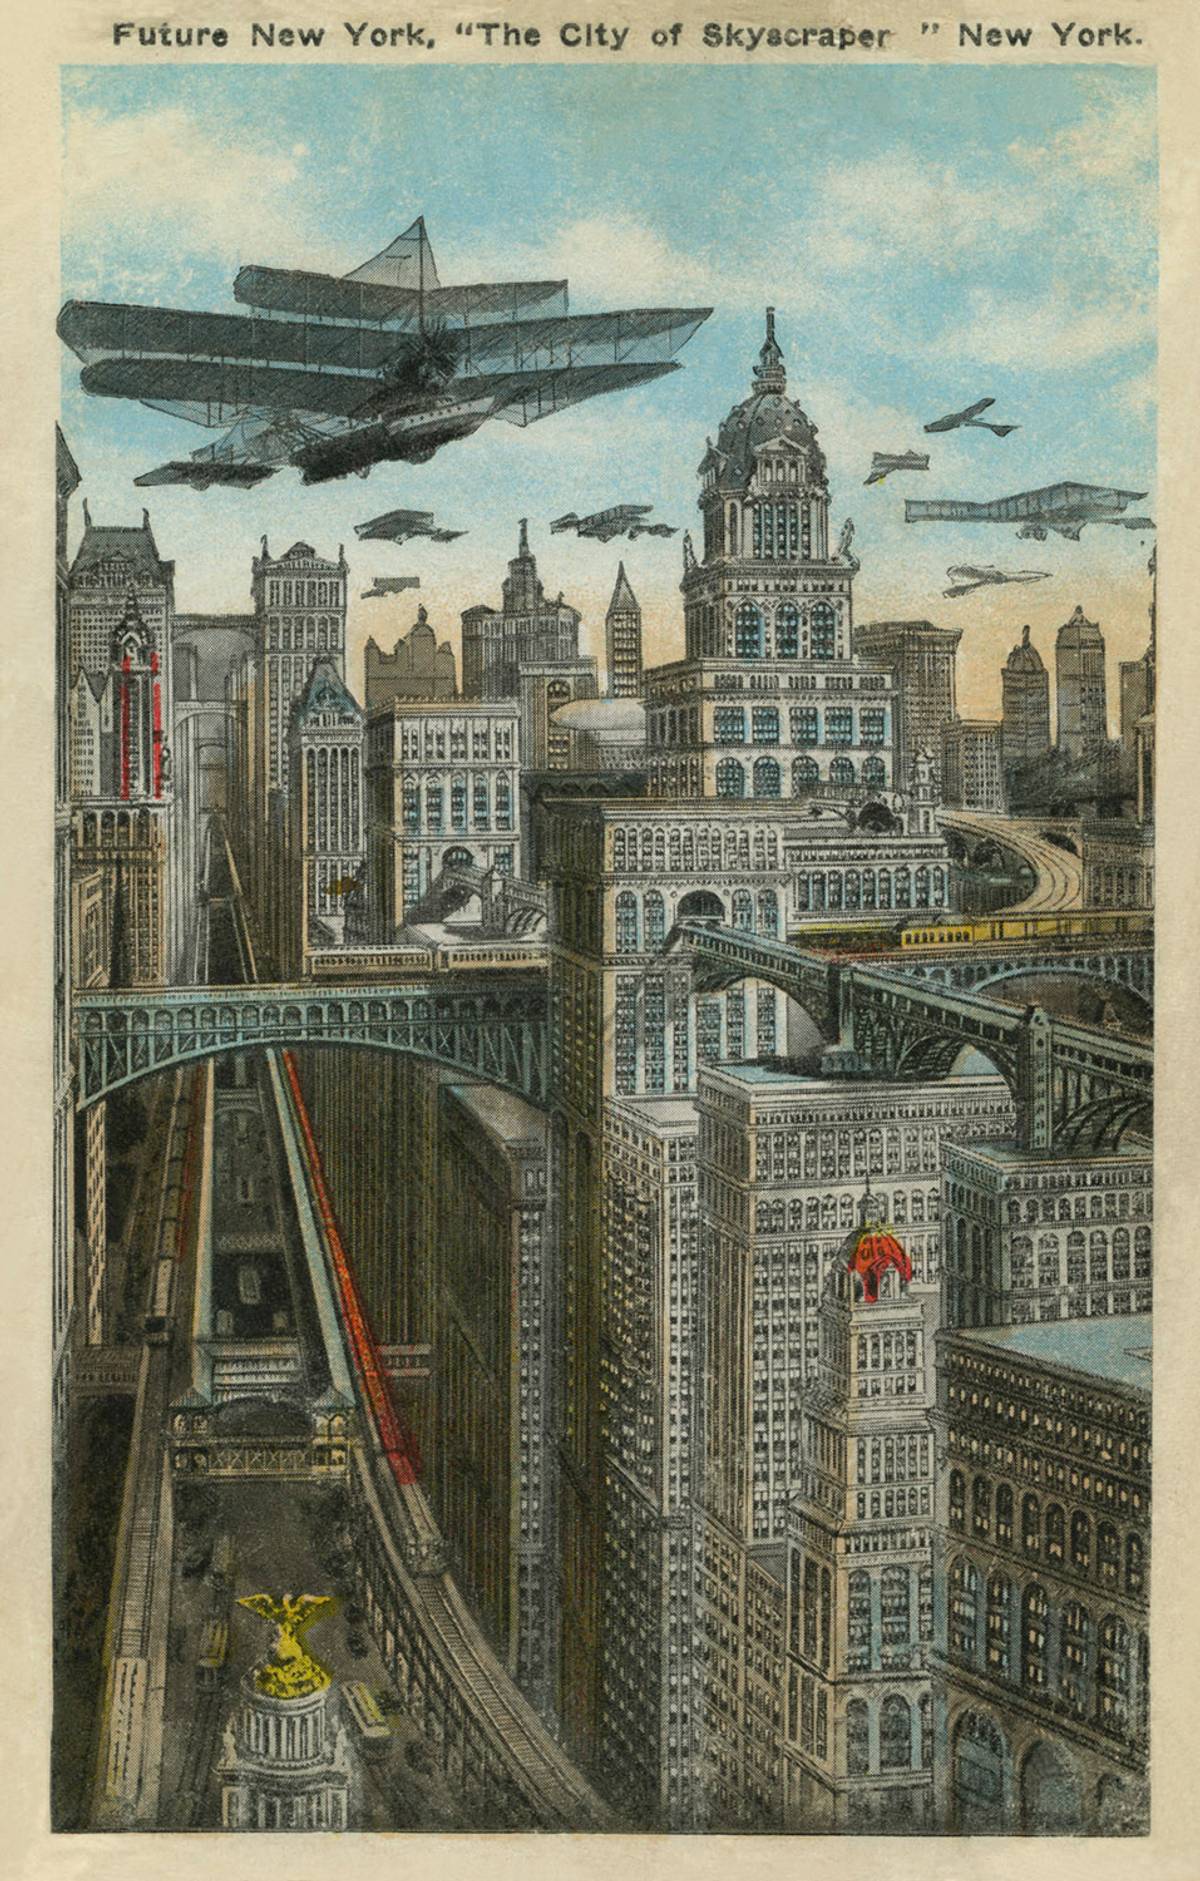 Undated postcard envisioning 'the future of New York.'